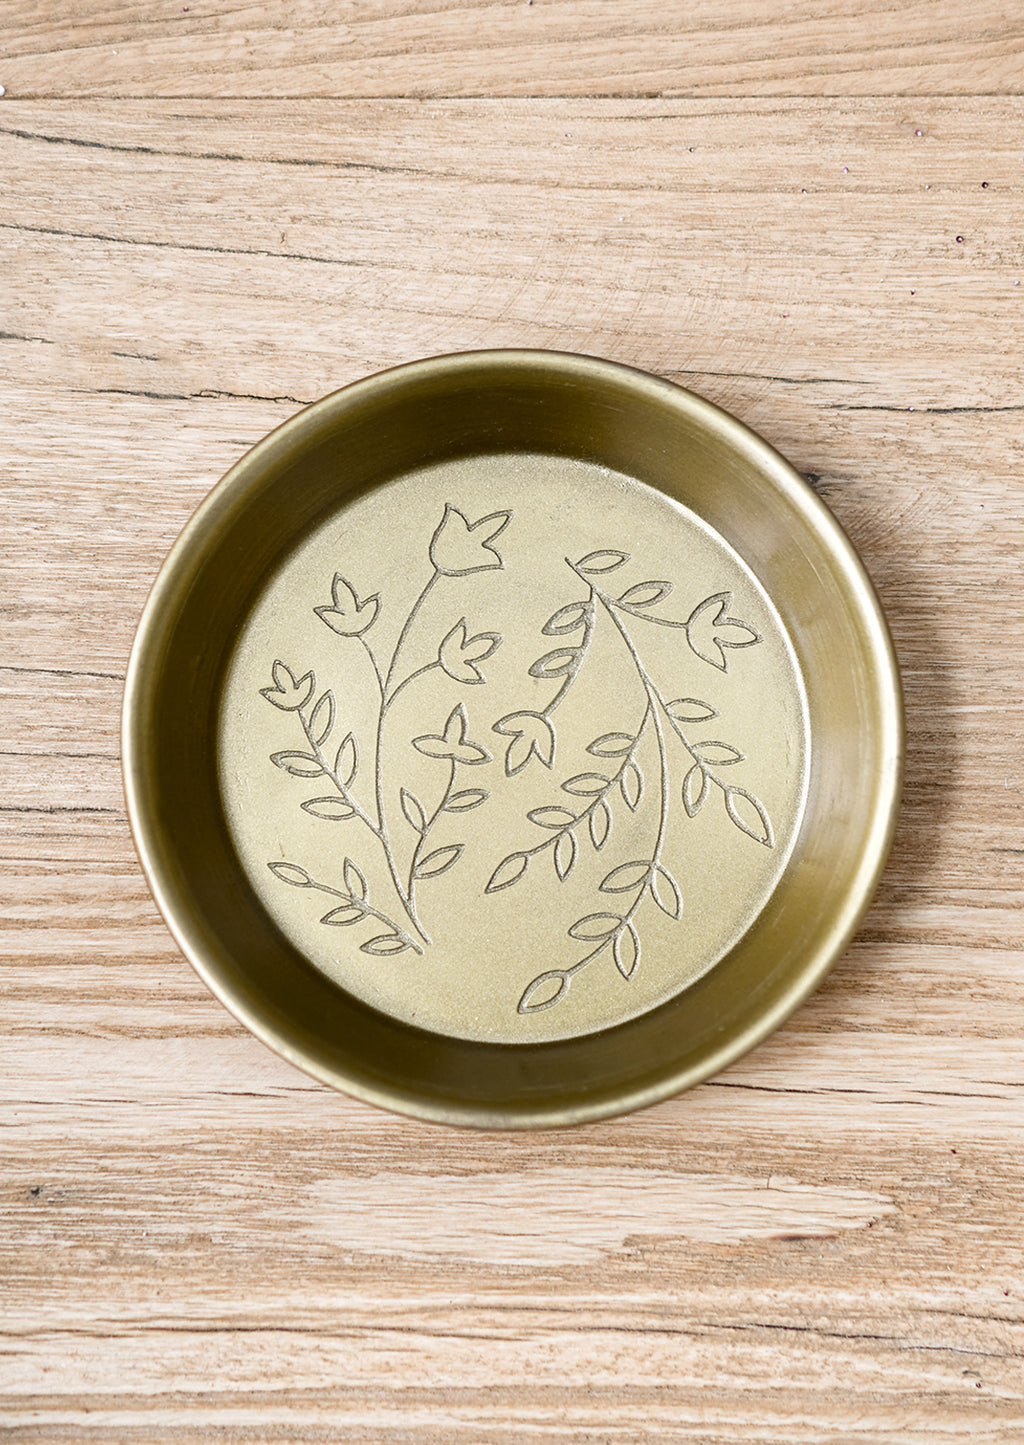 1: A small, round and shallow brass dish with floral engraving.